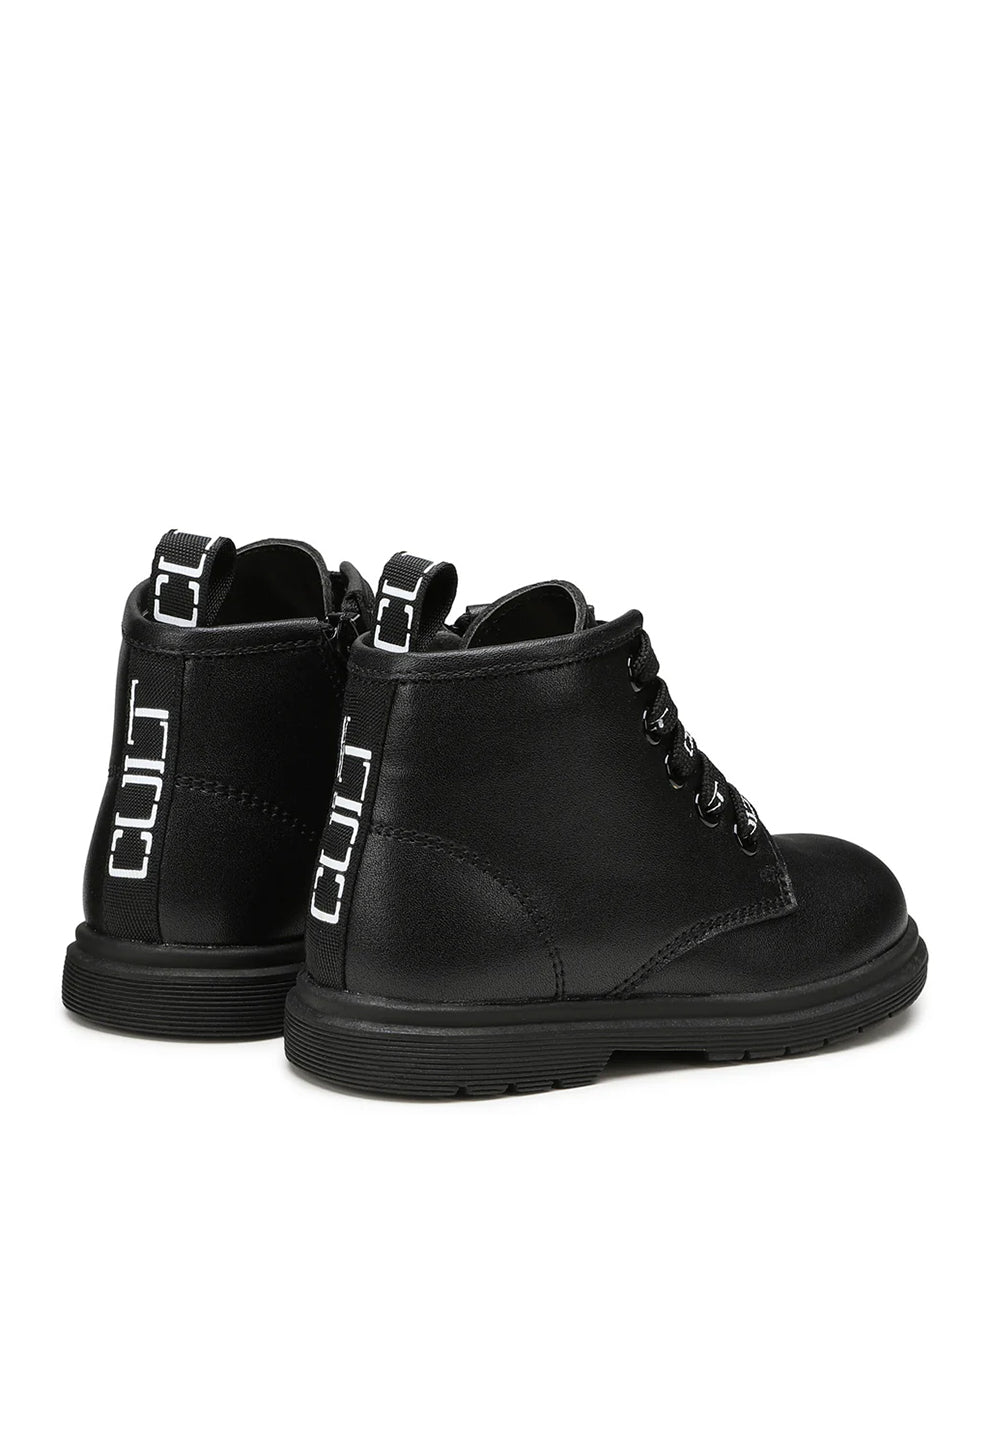 Black ankle boots for baby girls